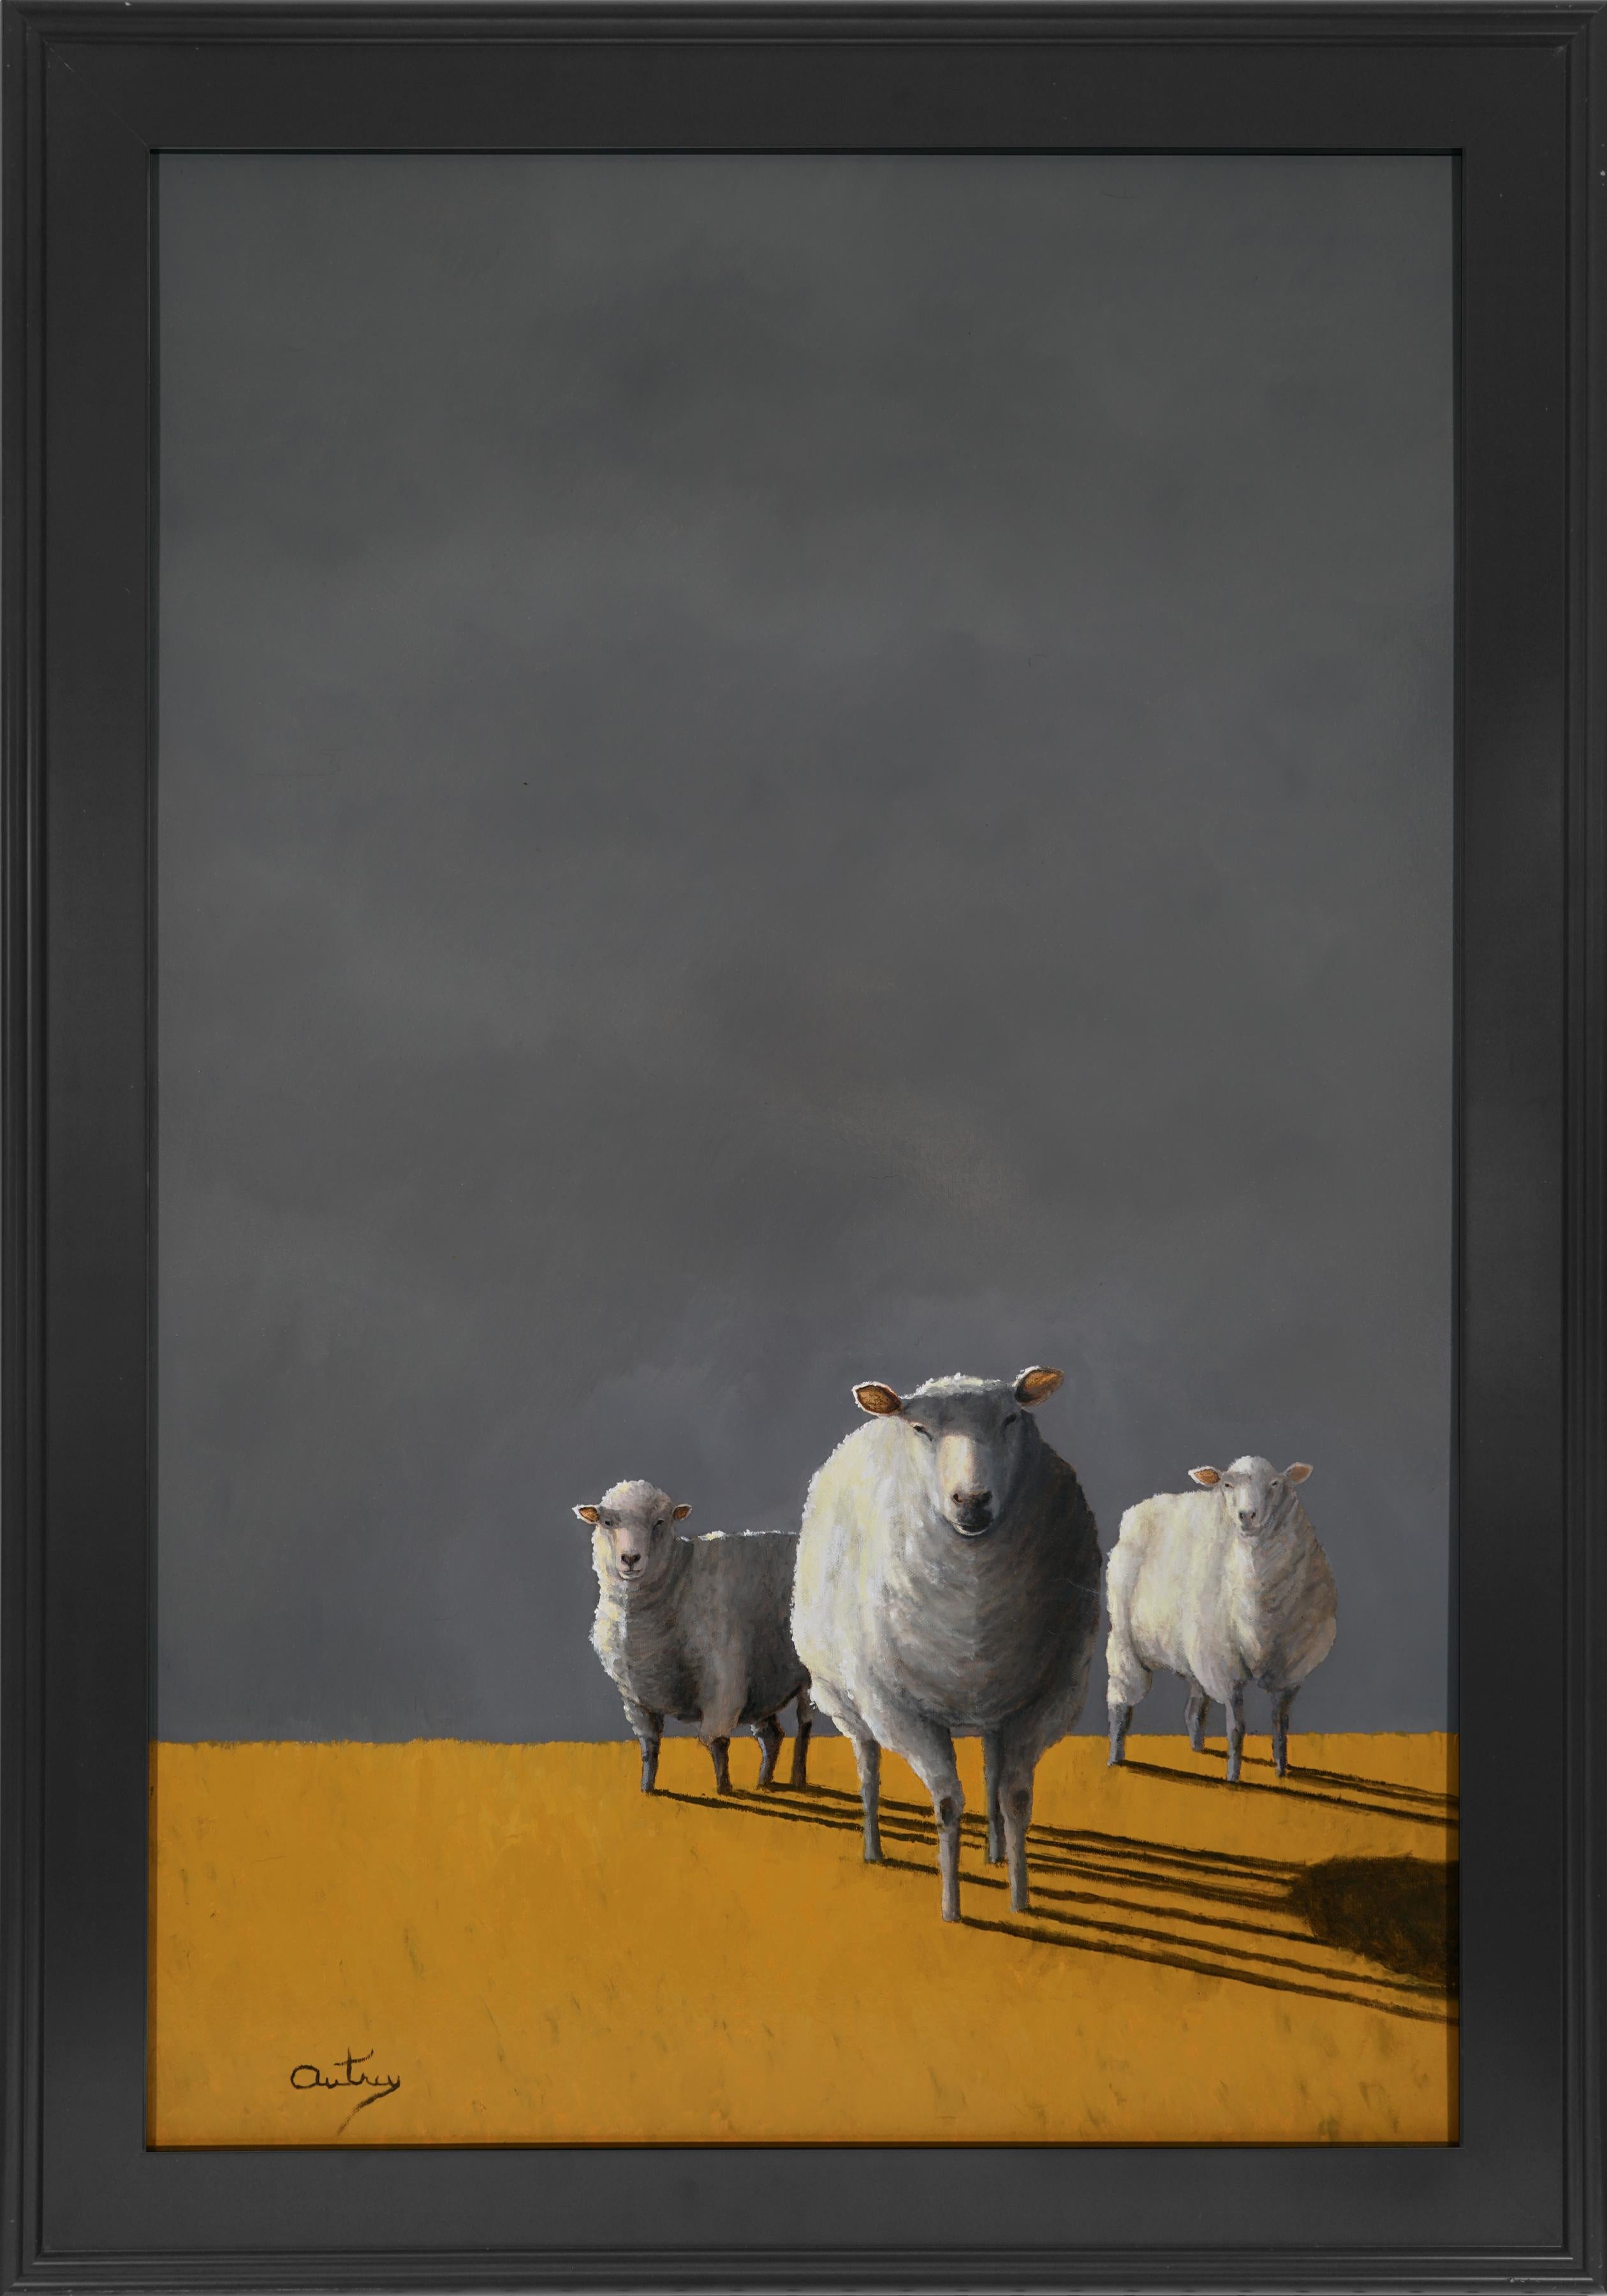 A TIME TO SHEAR    Realism Light and  Shadow, Sheep  Ovis (Latin) Oil on Canvas - Black Animal Painting by Luke Autrey